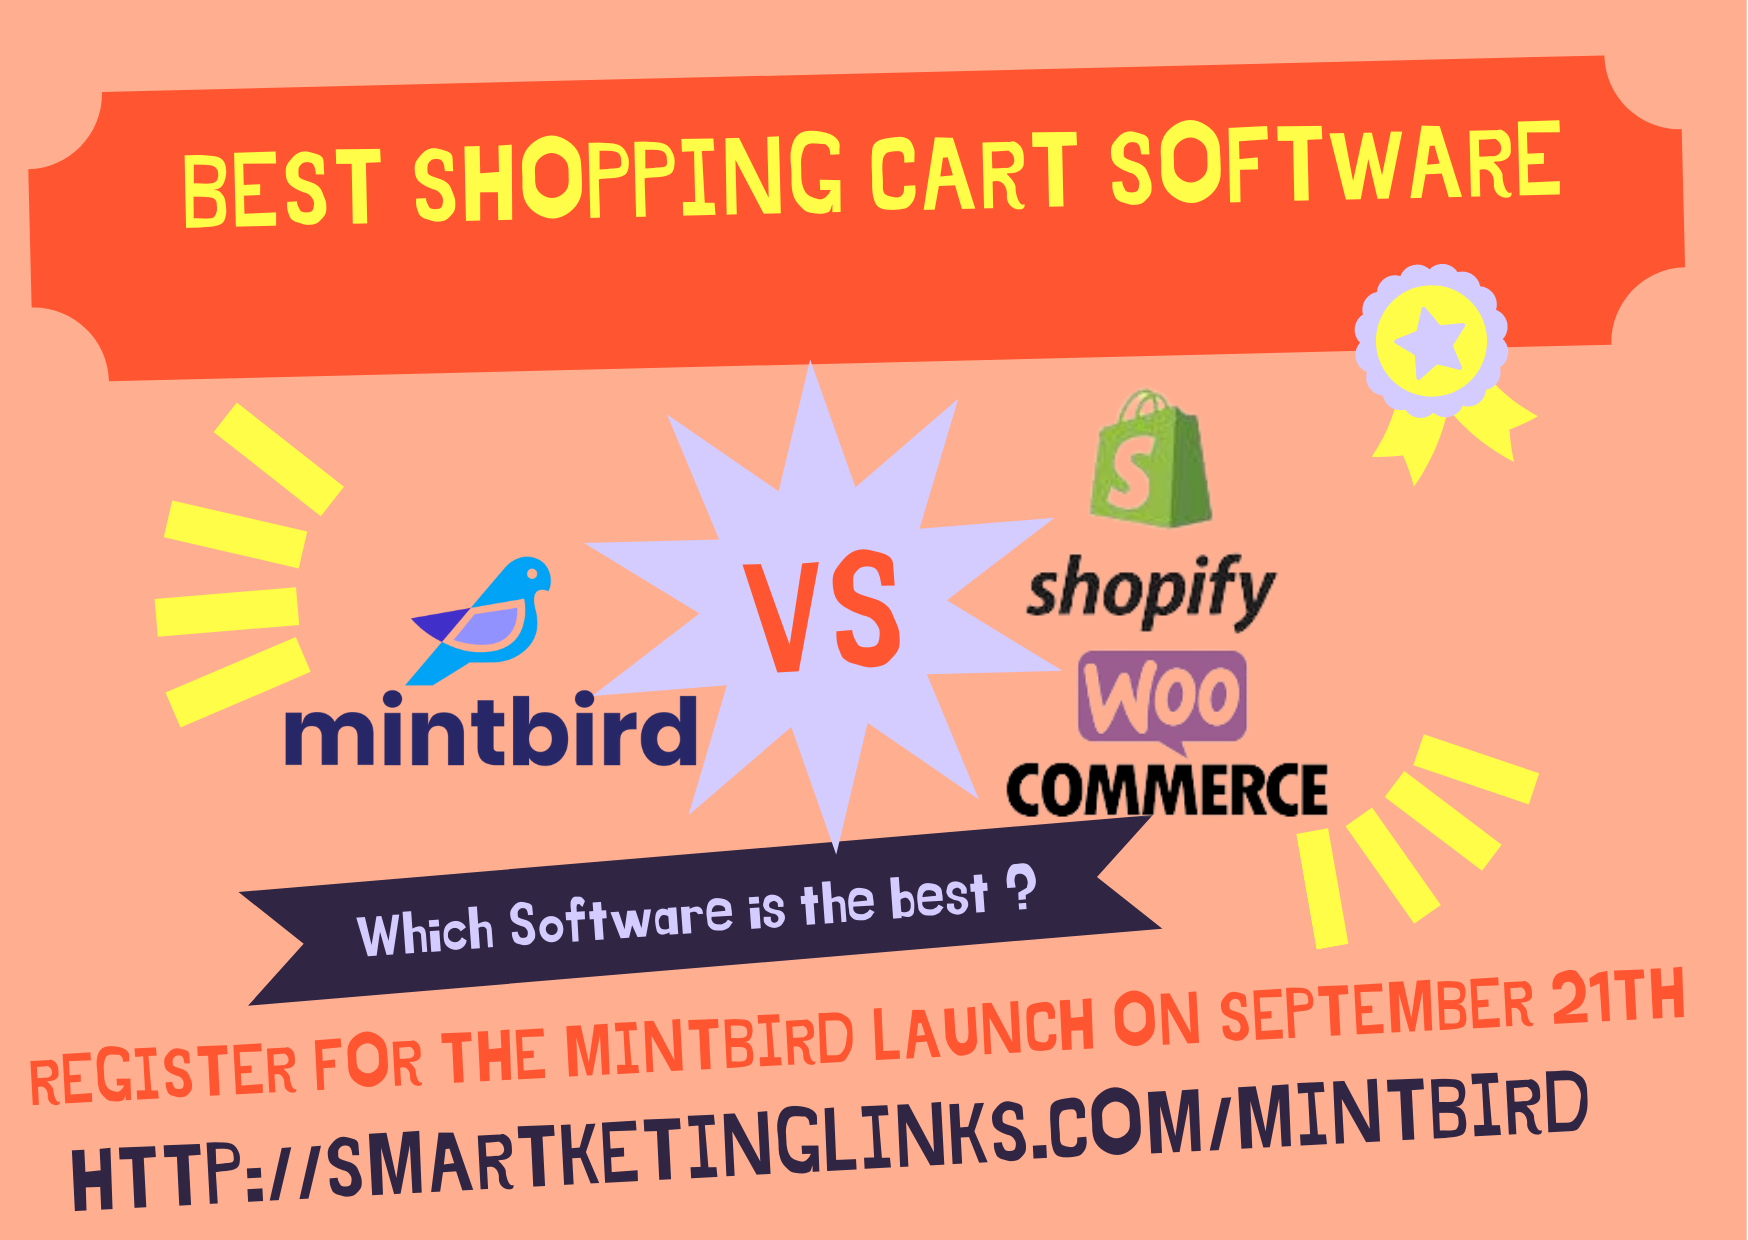 Click on this URL: http://smartketinglinks.com/mintbird to register to the MintBird Launch on September 21th and take part to the Power Affiliate Accelerator Bootcamps and get all bonuses given away during the prelaunch period!